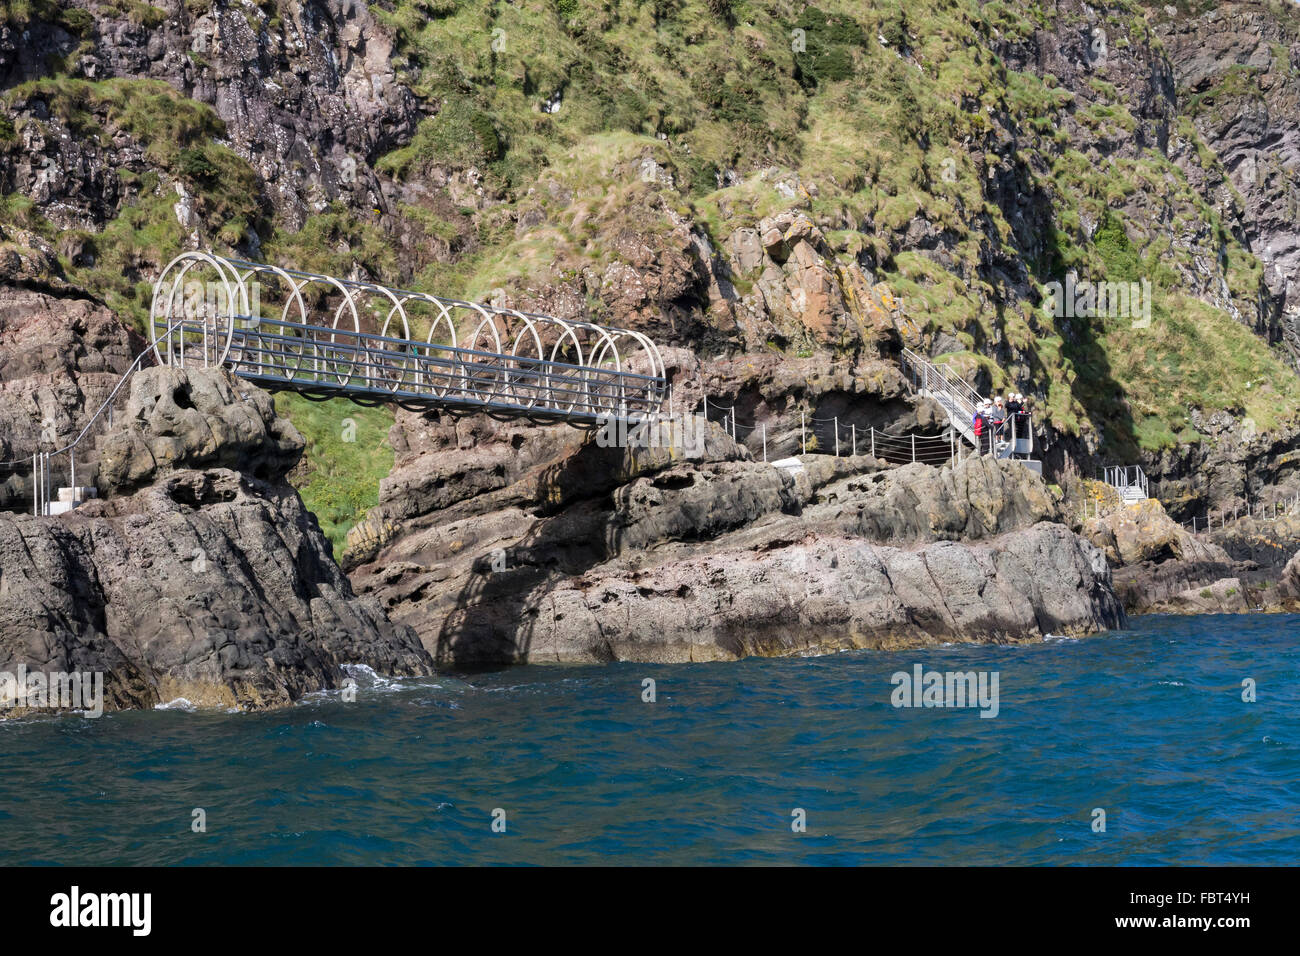 Northern Ireland tourist attraction - people on the Gobbins Cliff Path walk in County Antrim, Northern Ireland. Stock Photo